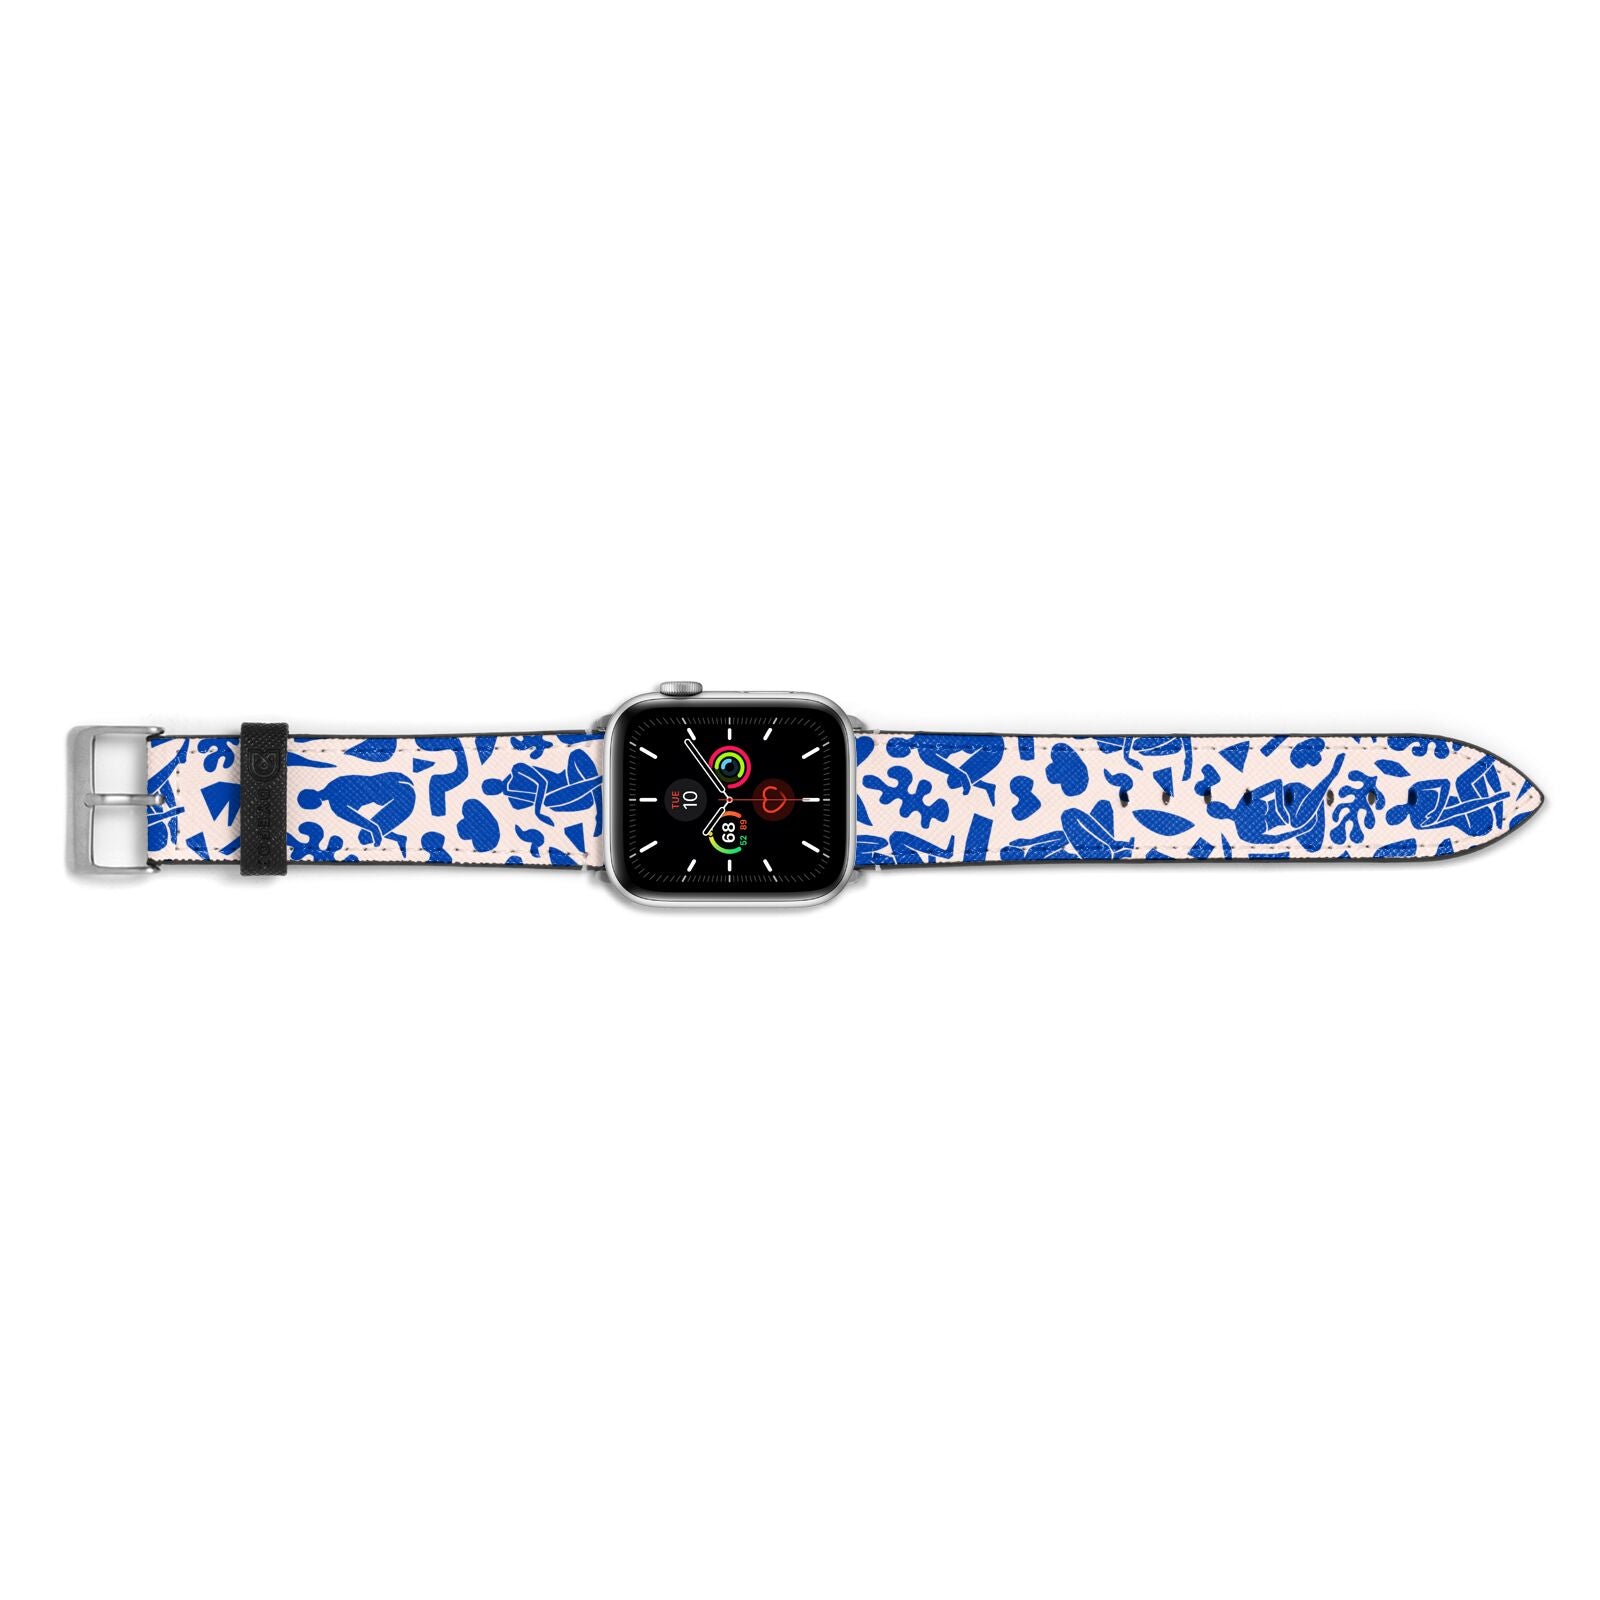 Abstract Art Apple Watch Strap Landscape Image Silver Hardware